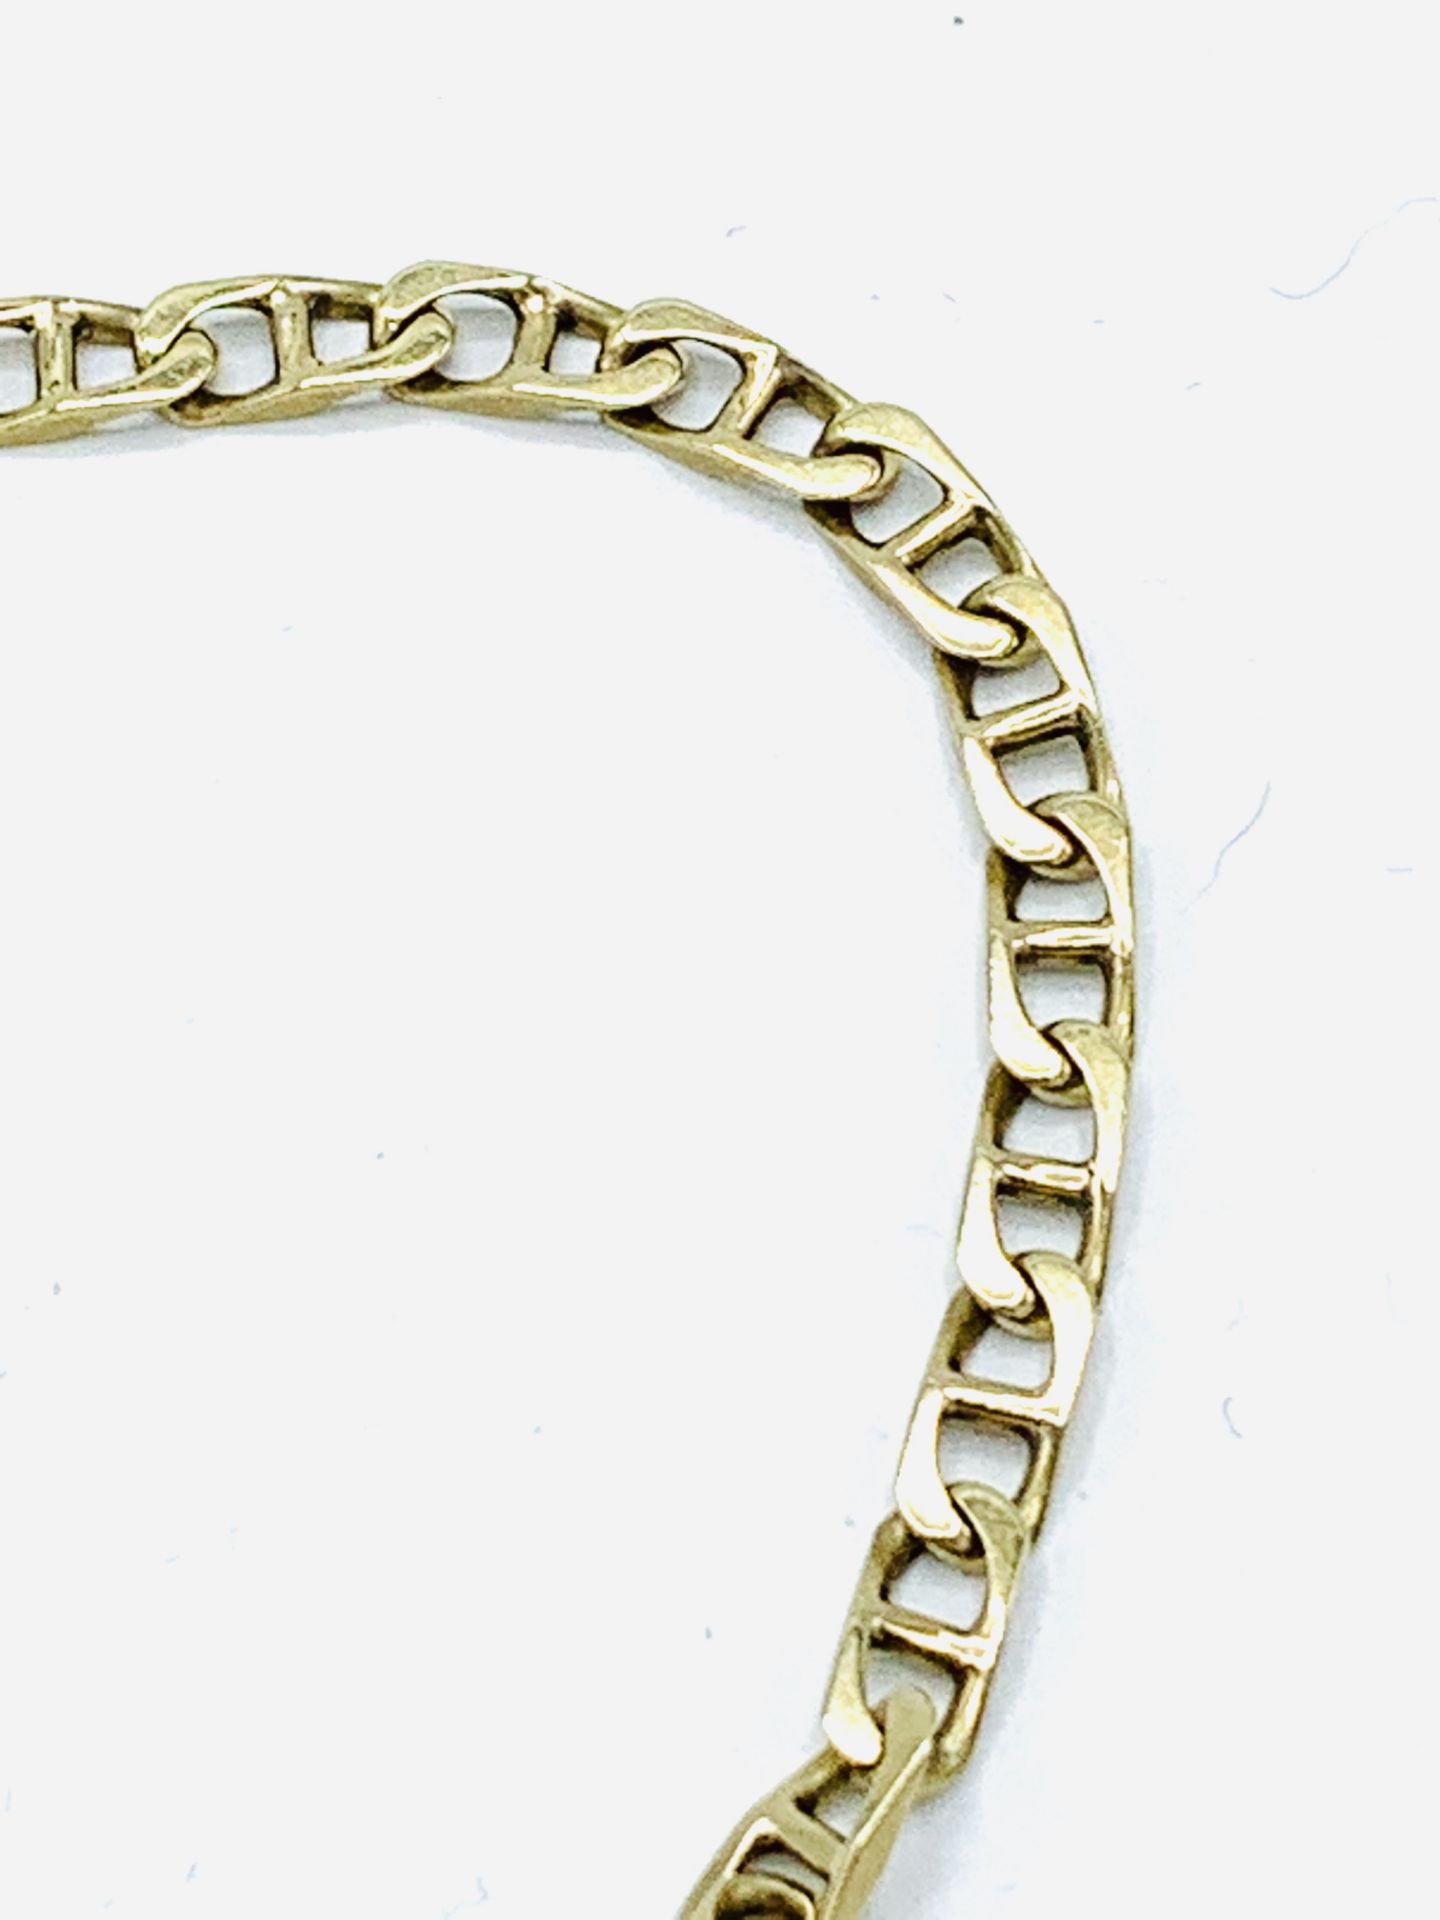 9ct gold flat chain bracelet - Image 3 of 3